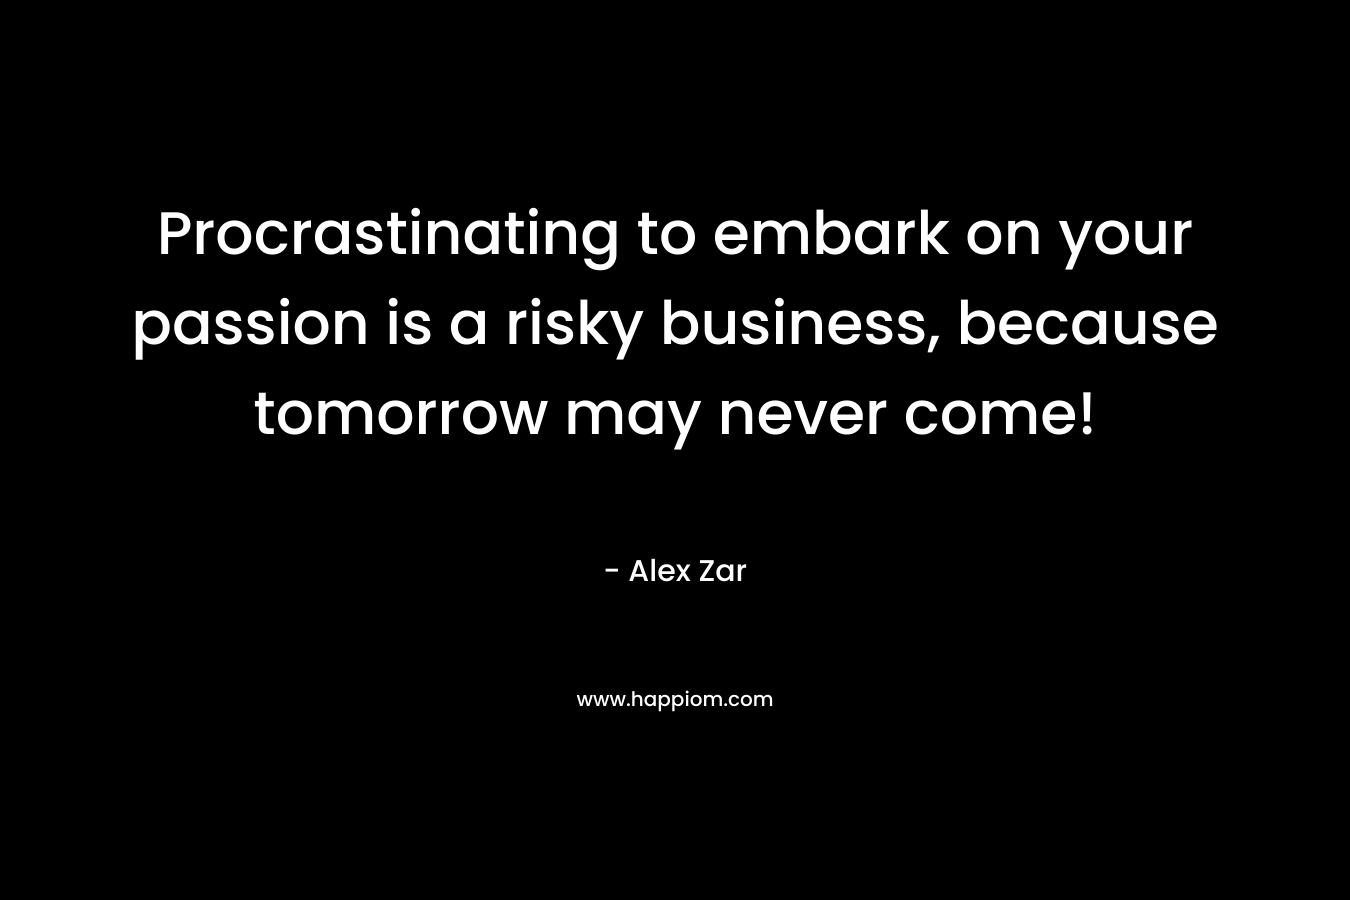 Procrastinating to embark on your passion is a risky business, because tomorrow may never come! – Alex Zar